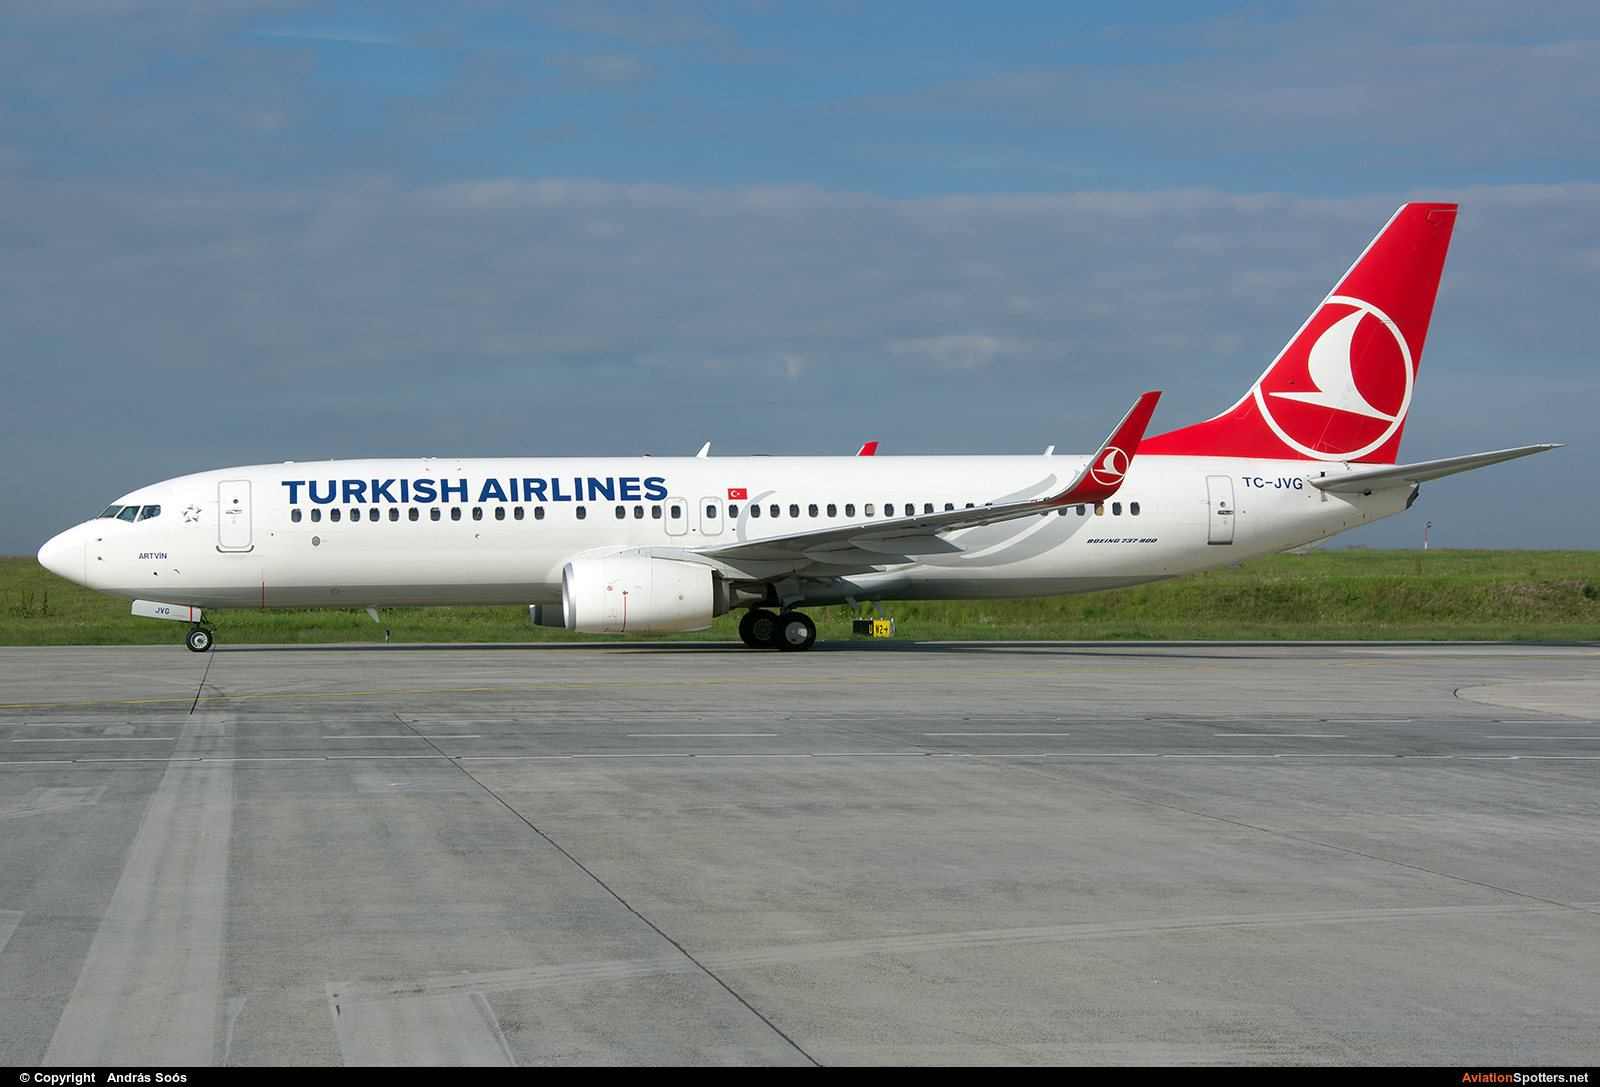 Turkish Airlines  -  737-800  (TC-JVG) By András Soós (sas1965)